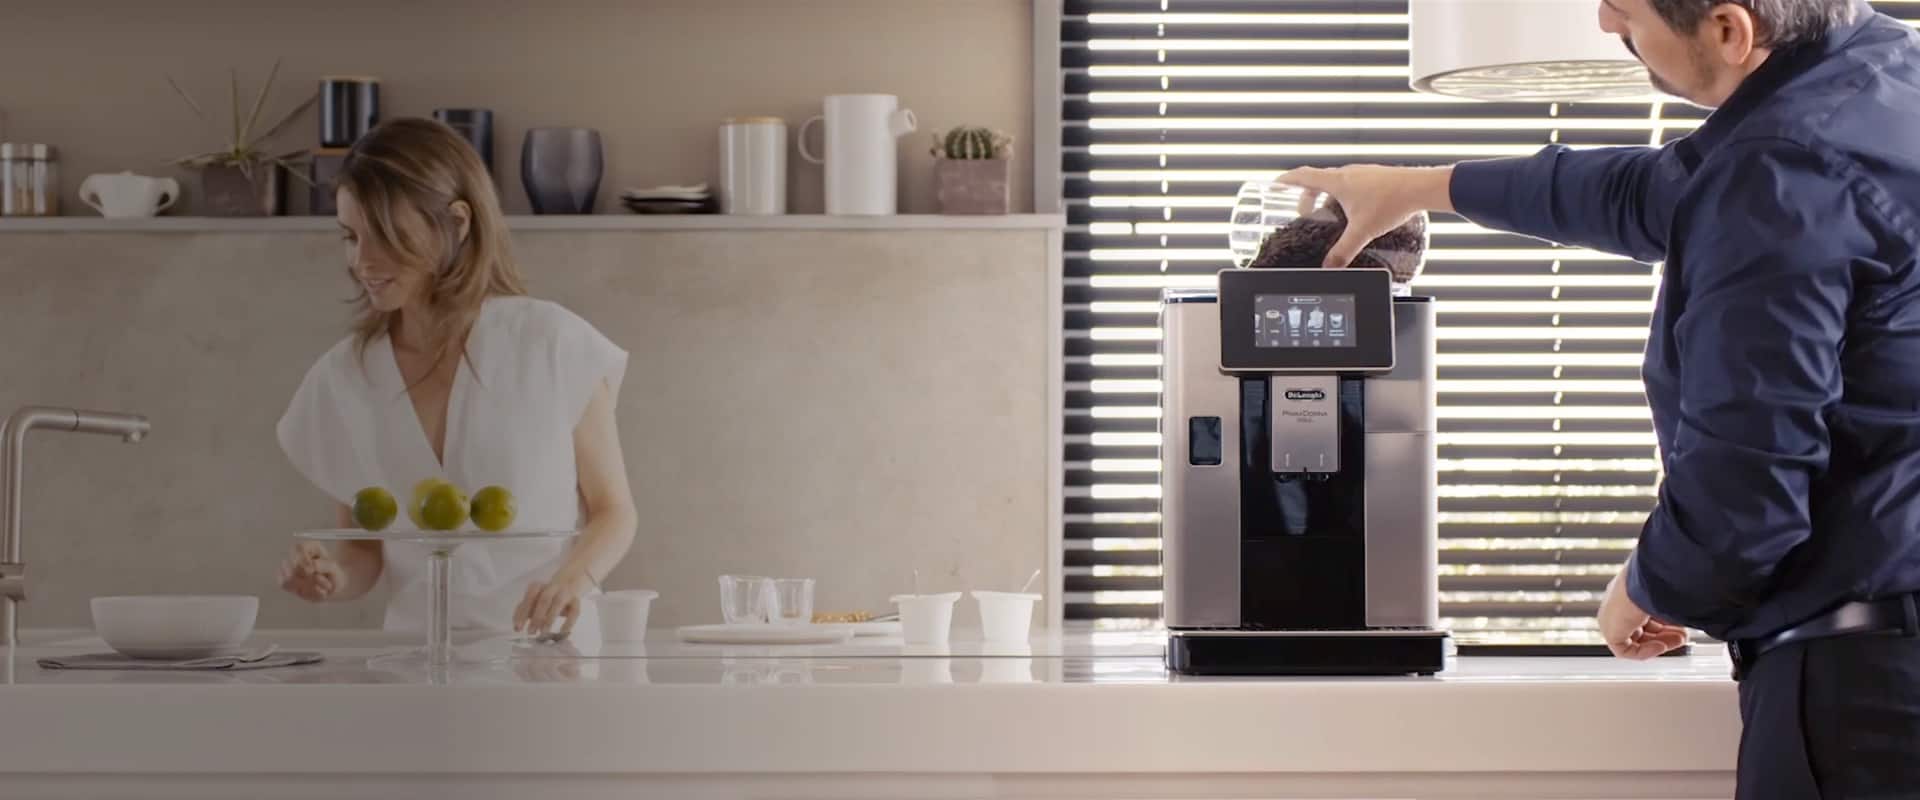 Italian Home Appliances to Live Better Everyday